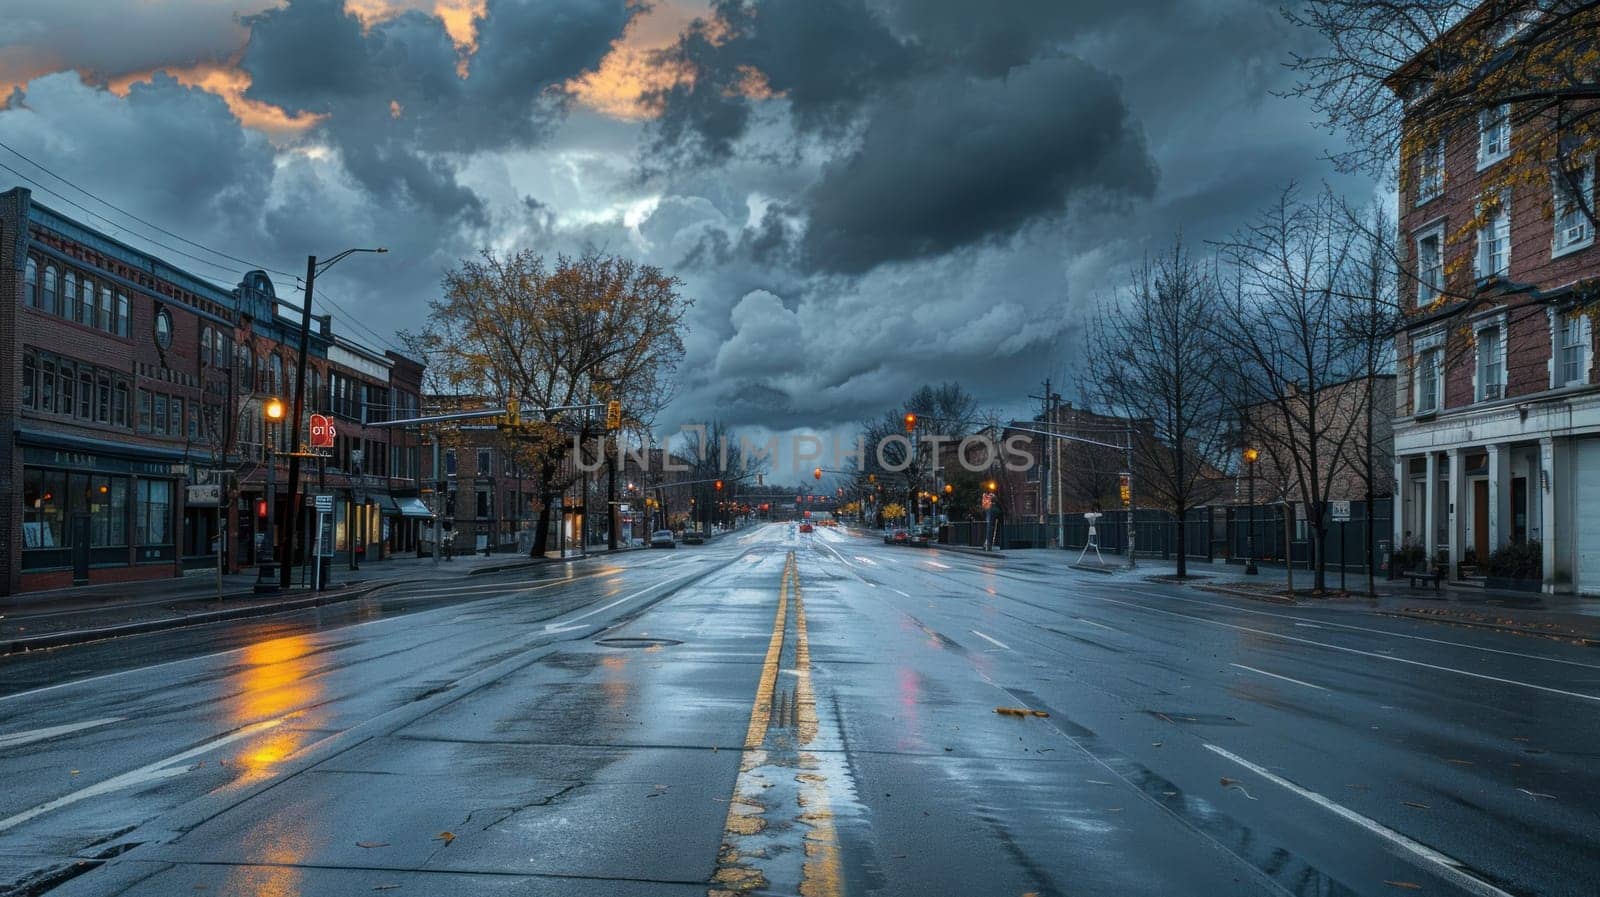 Gray clouds looming over a deserted city street on a gloomy Monday morning. by golfmerrymaker